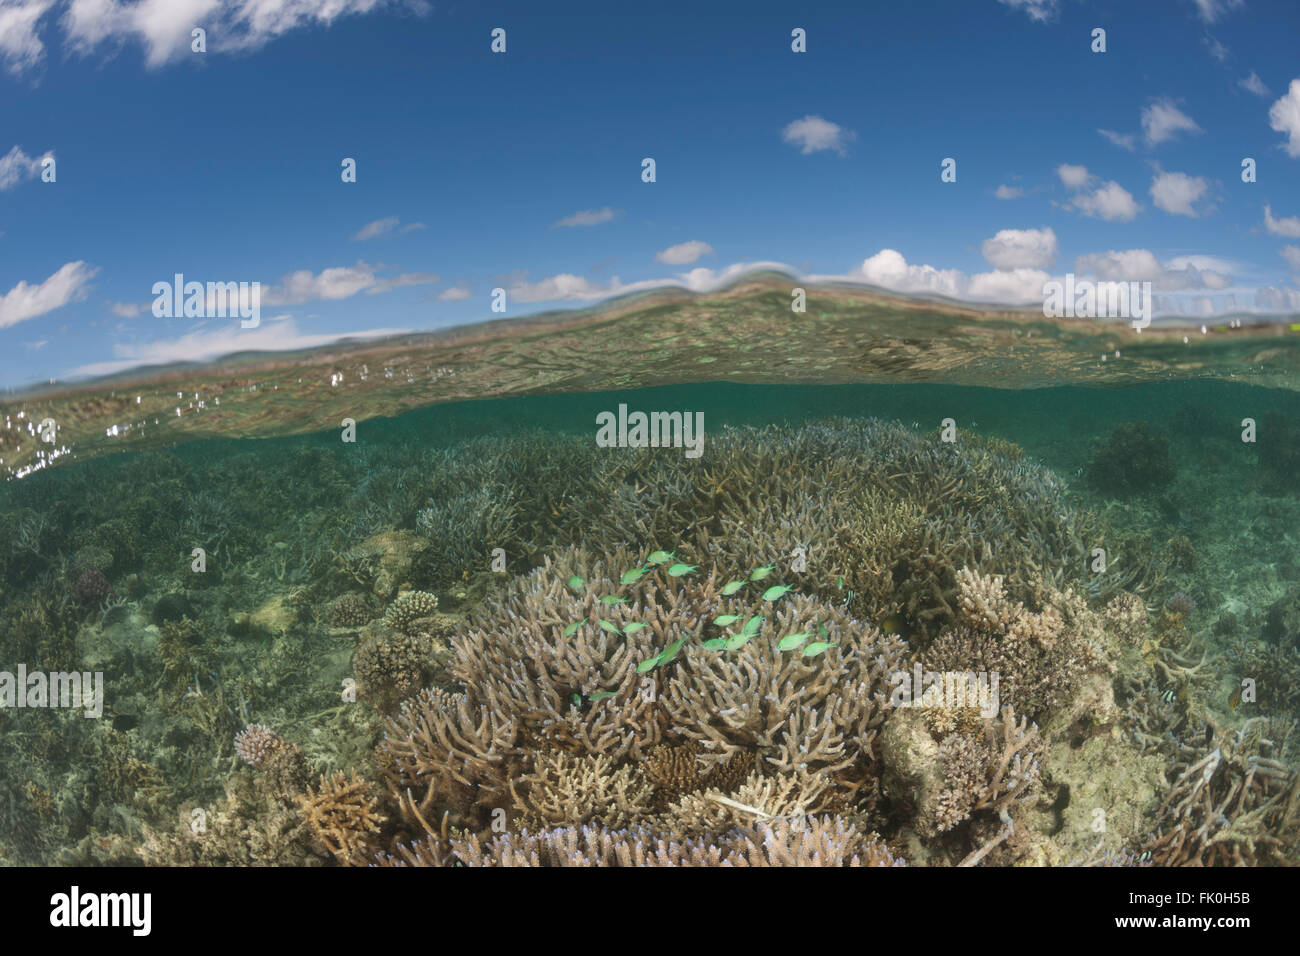 Healthy coral reefs with abundant marine life in tambo or marine protected areas - split level. Stock Photo